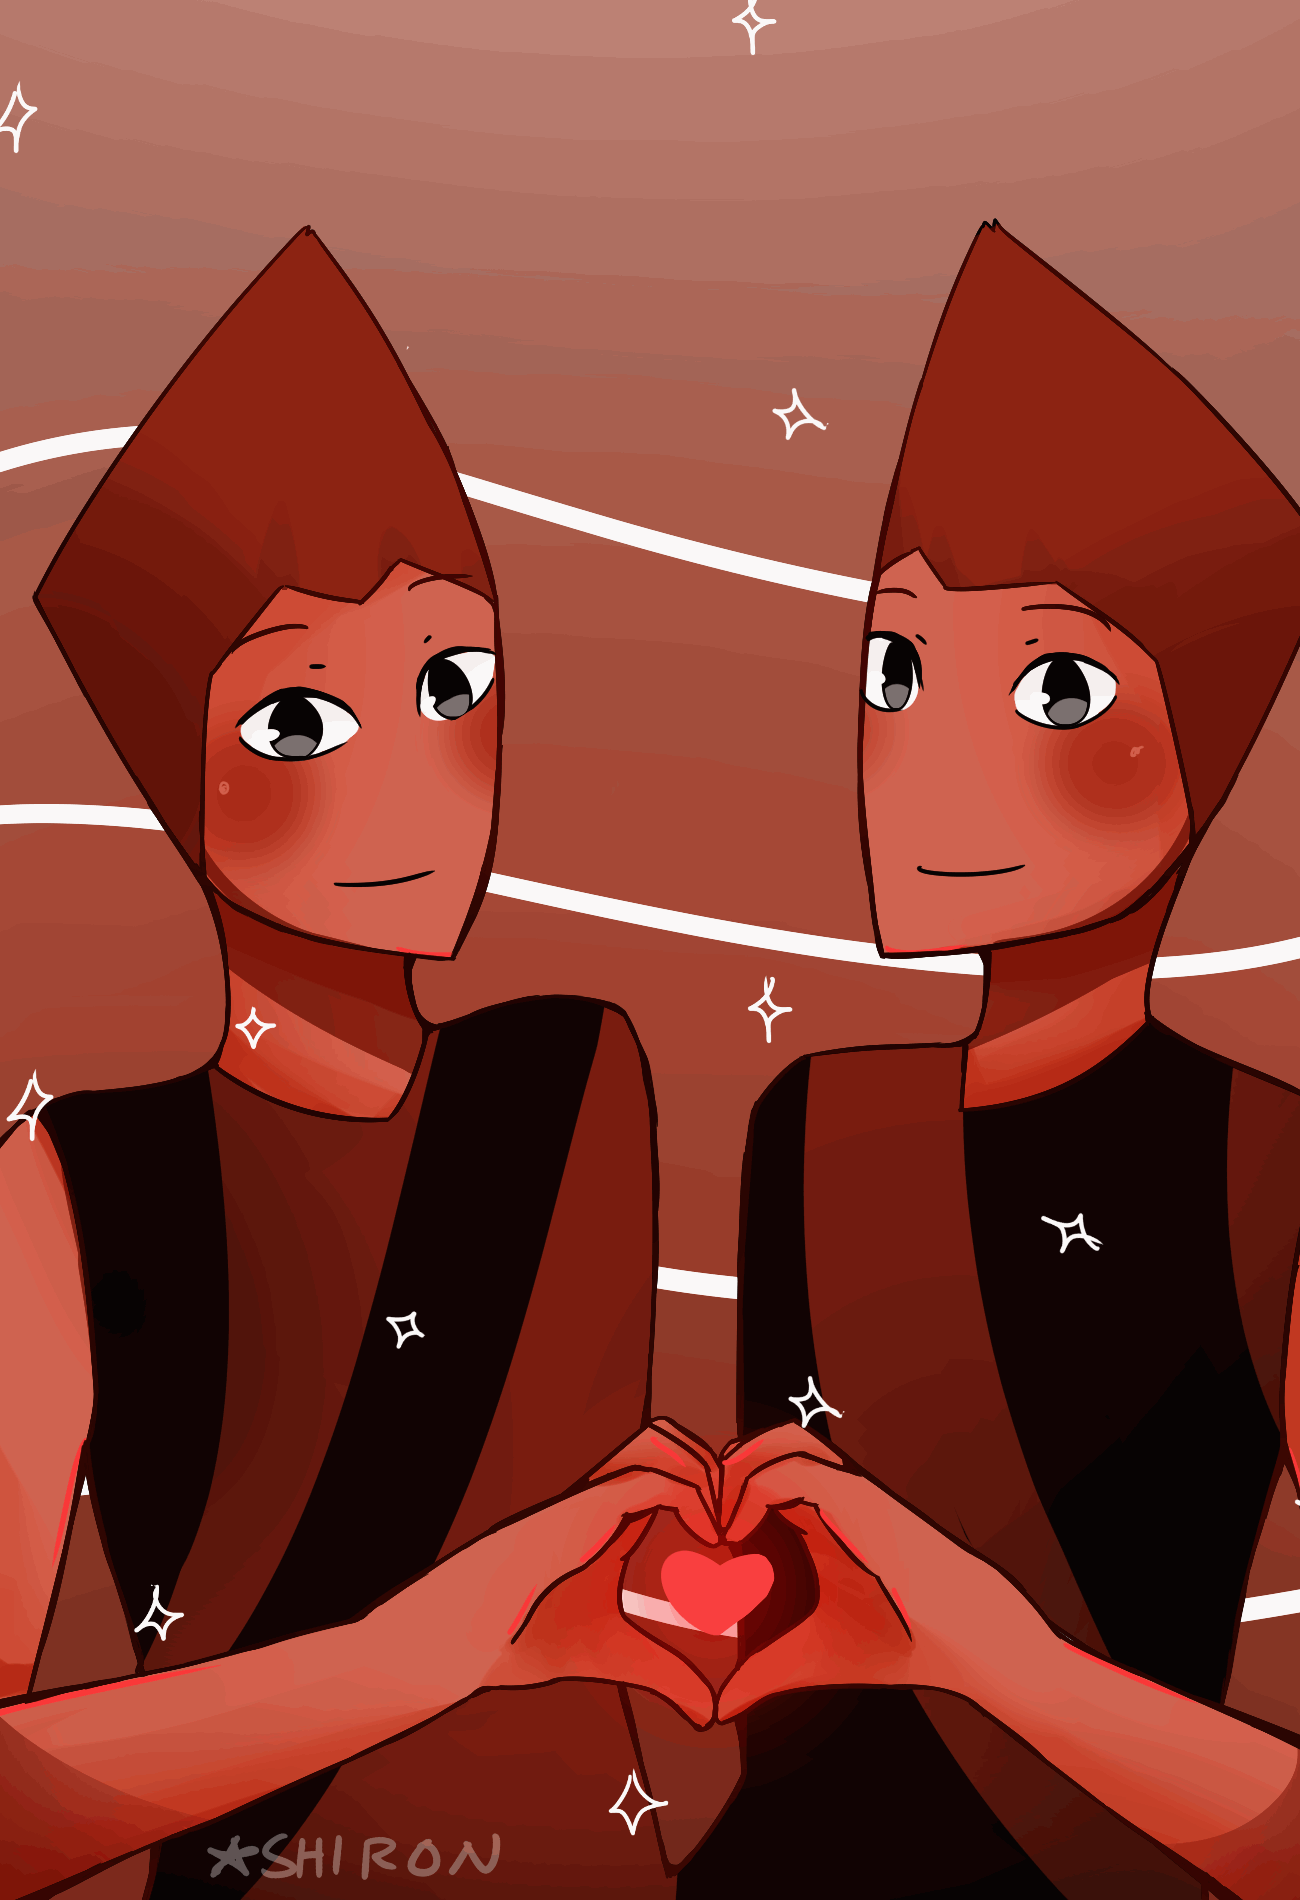 Rutile twins doing the heart thing (I don’t ship them btw its just a cute thing).